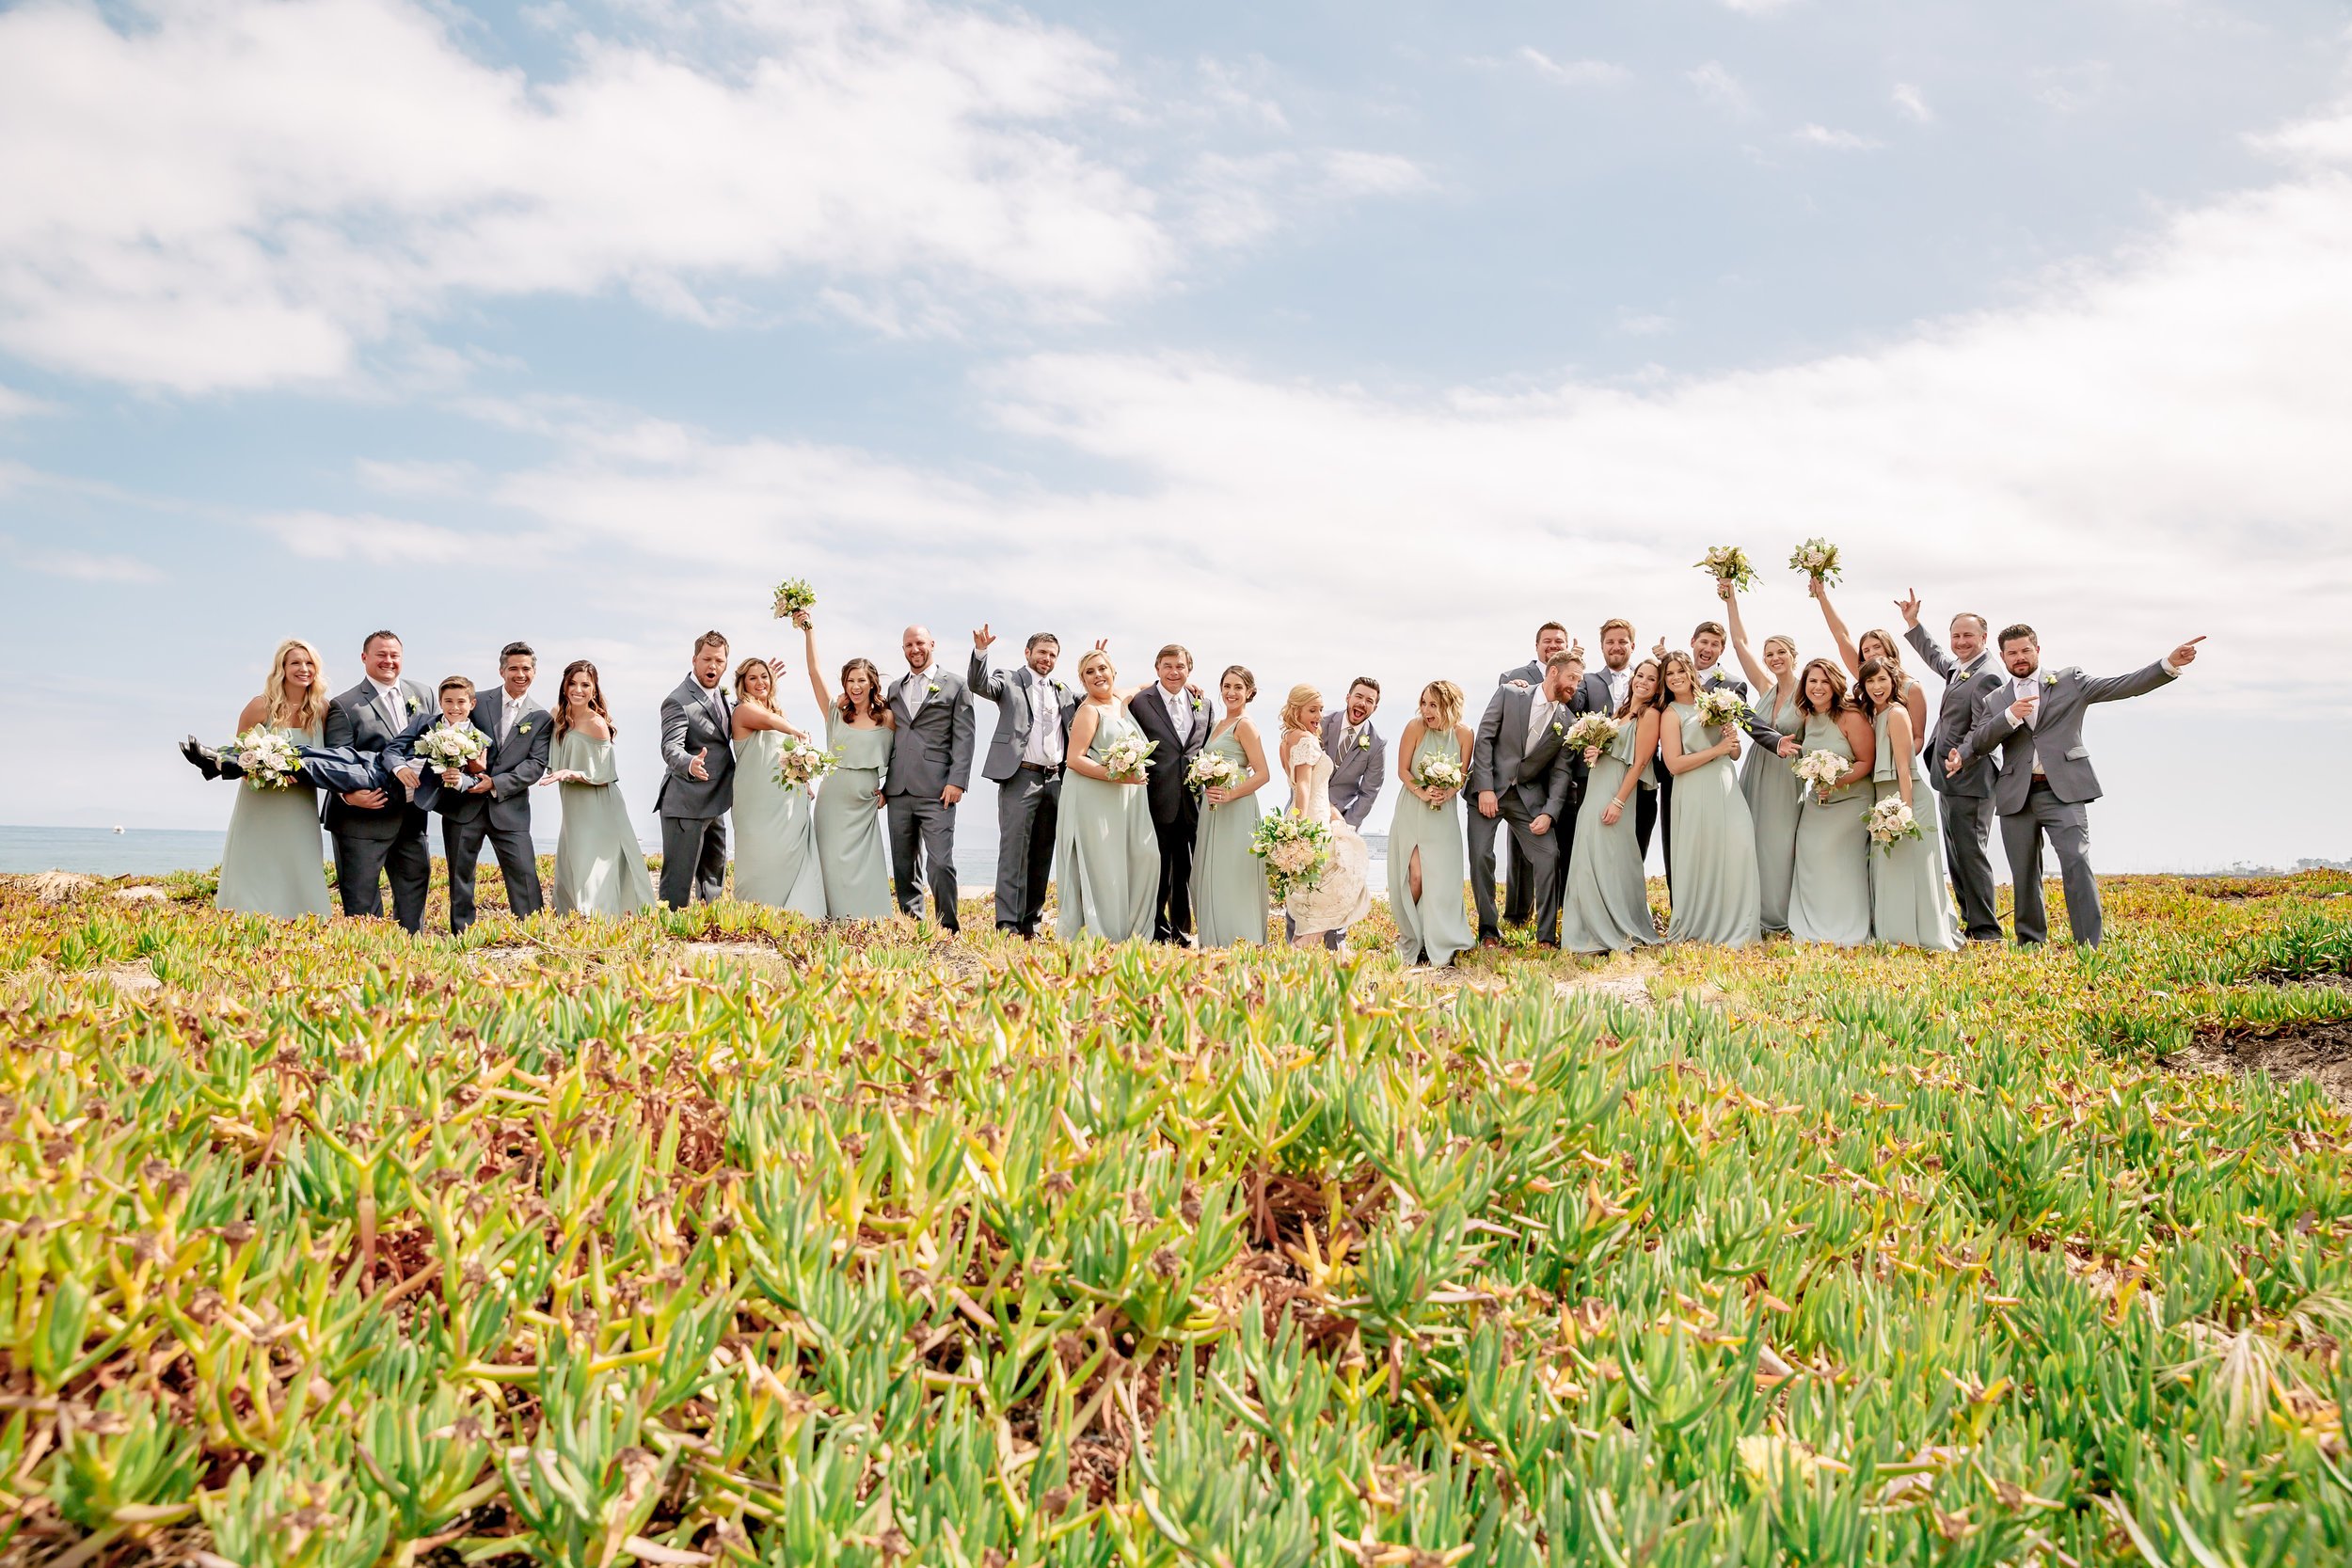 www.santabarbarawedding.com | Rewind Photography | Events by M and M | Santa Barbara Historical Museum | Bridal Party